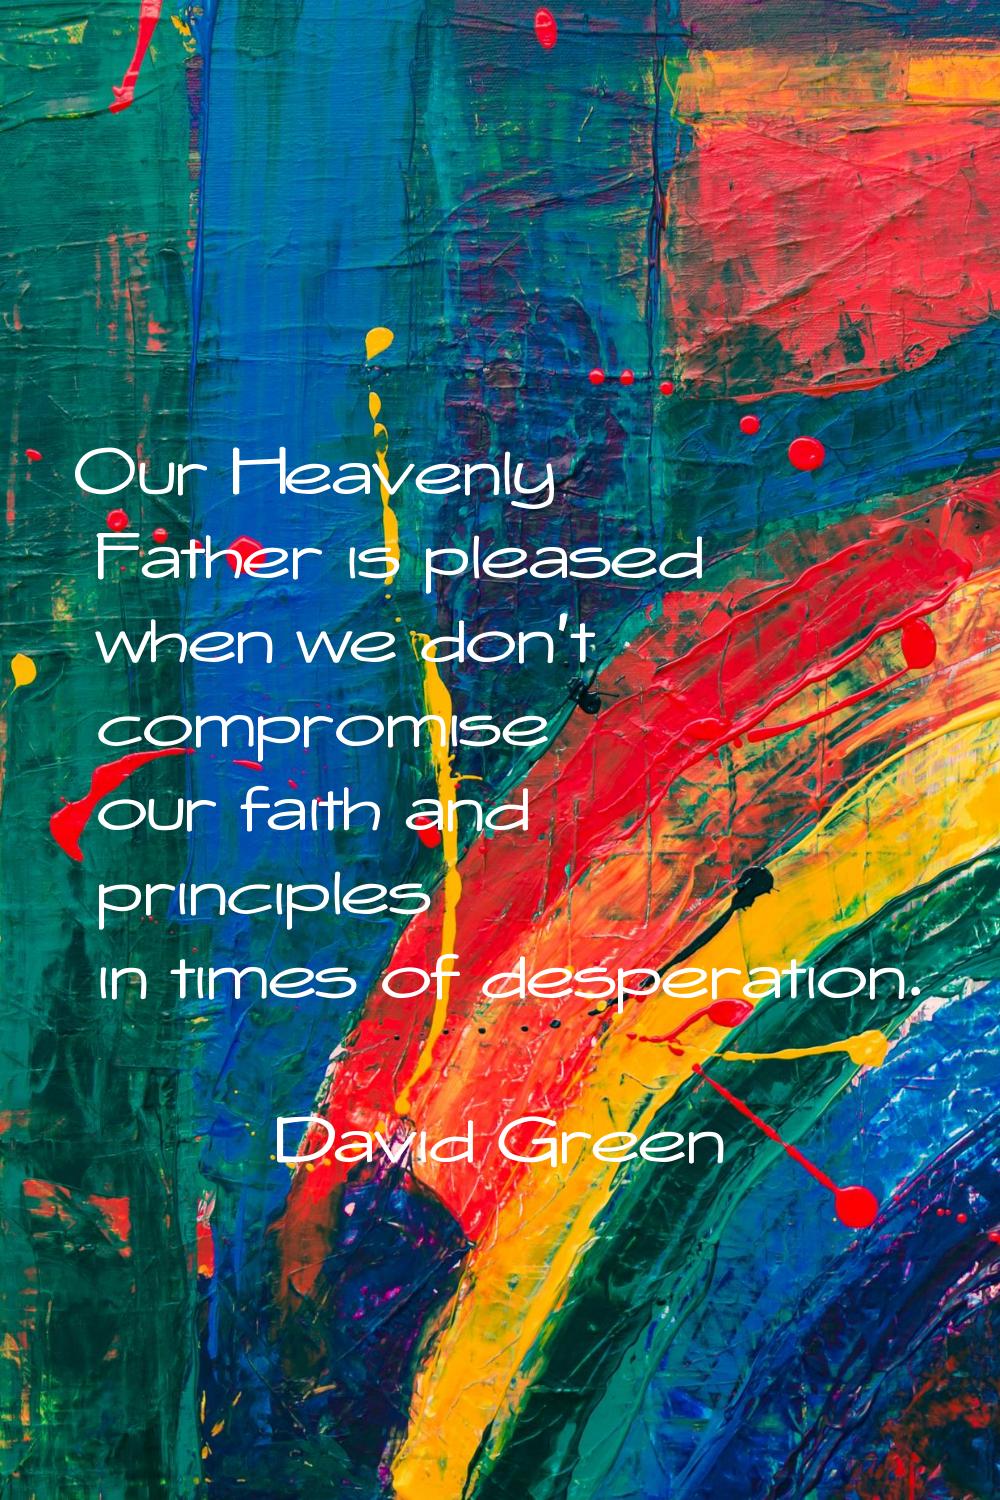 Our Heavenly Father is pleased when we don't compromise our faith and principles in times of desper